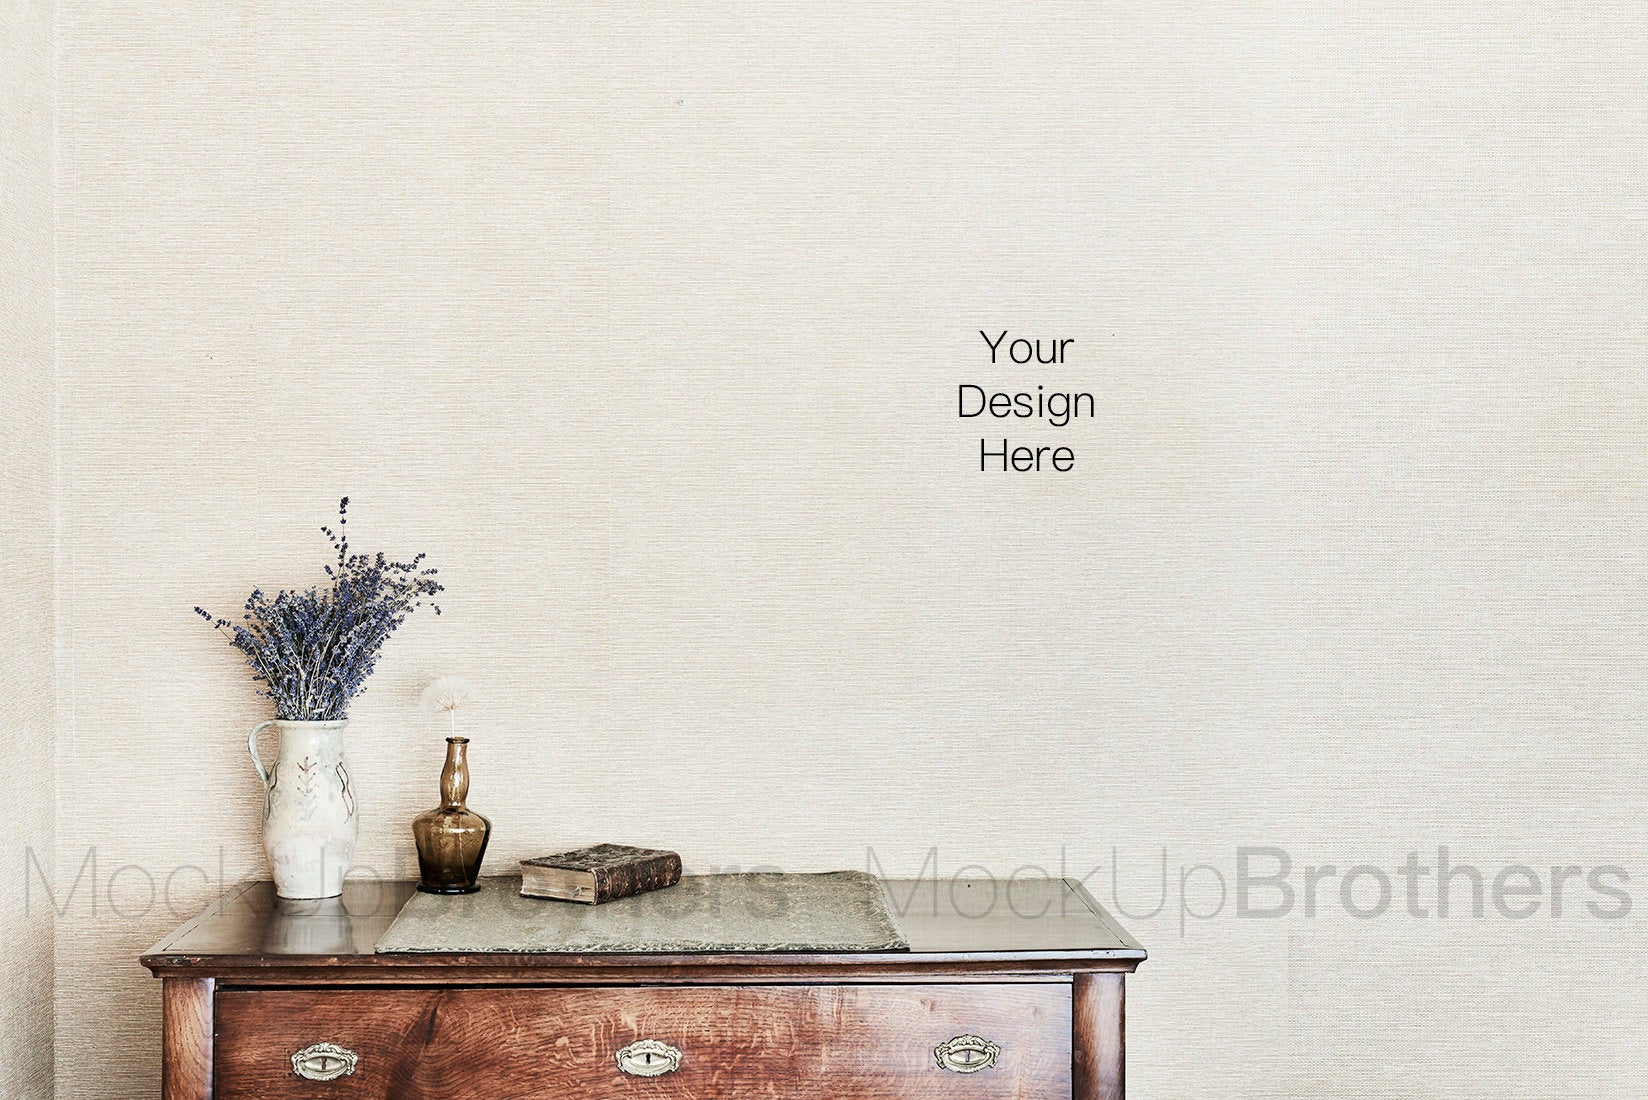 Country style interior mock up by Mockup Brothers